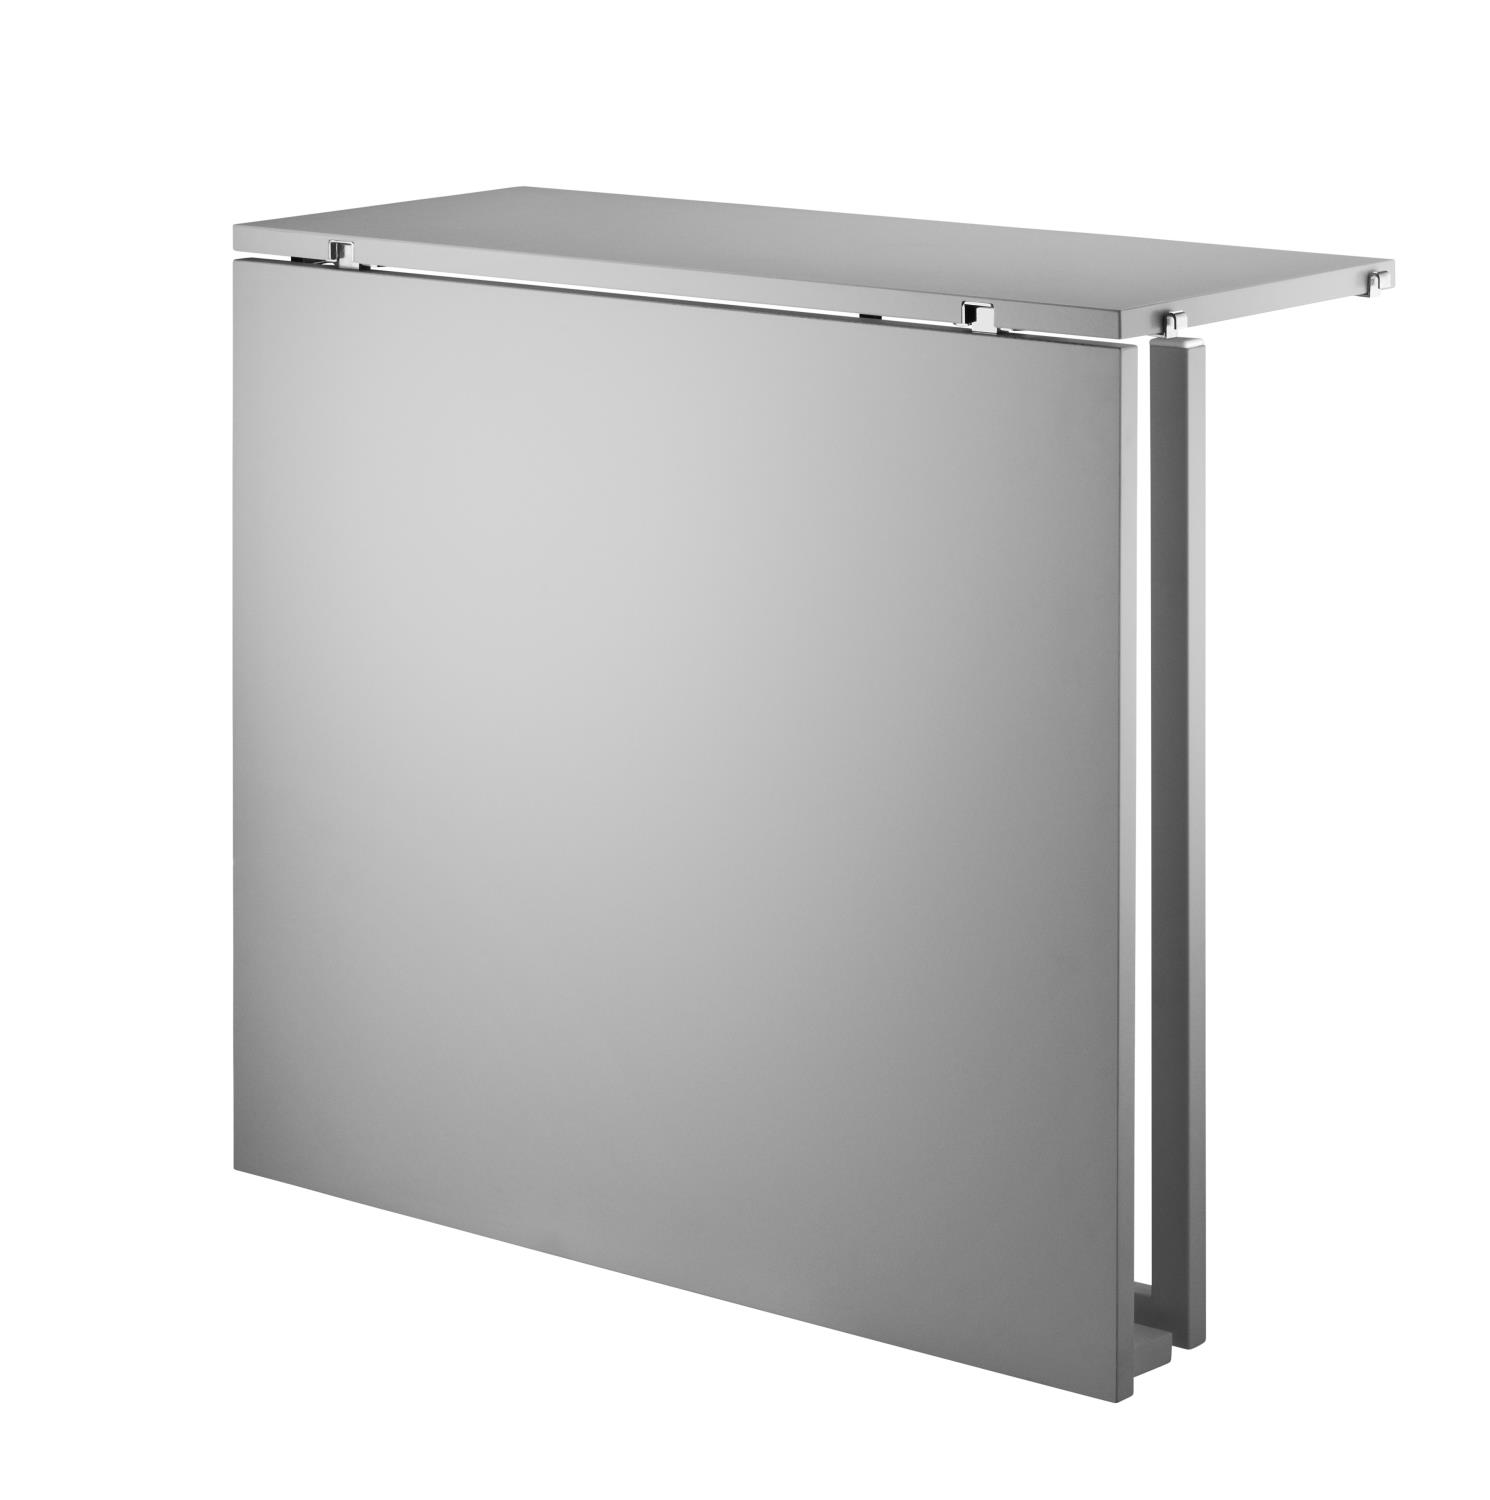 String - Folding Table - Grey and Grey